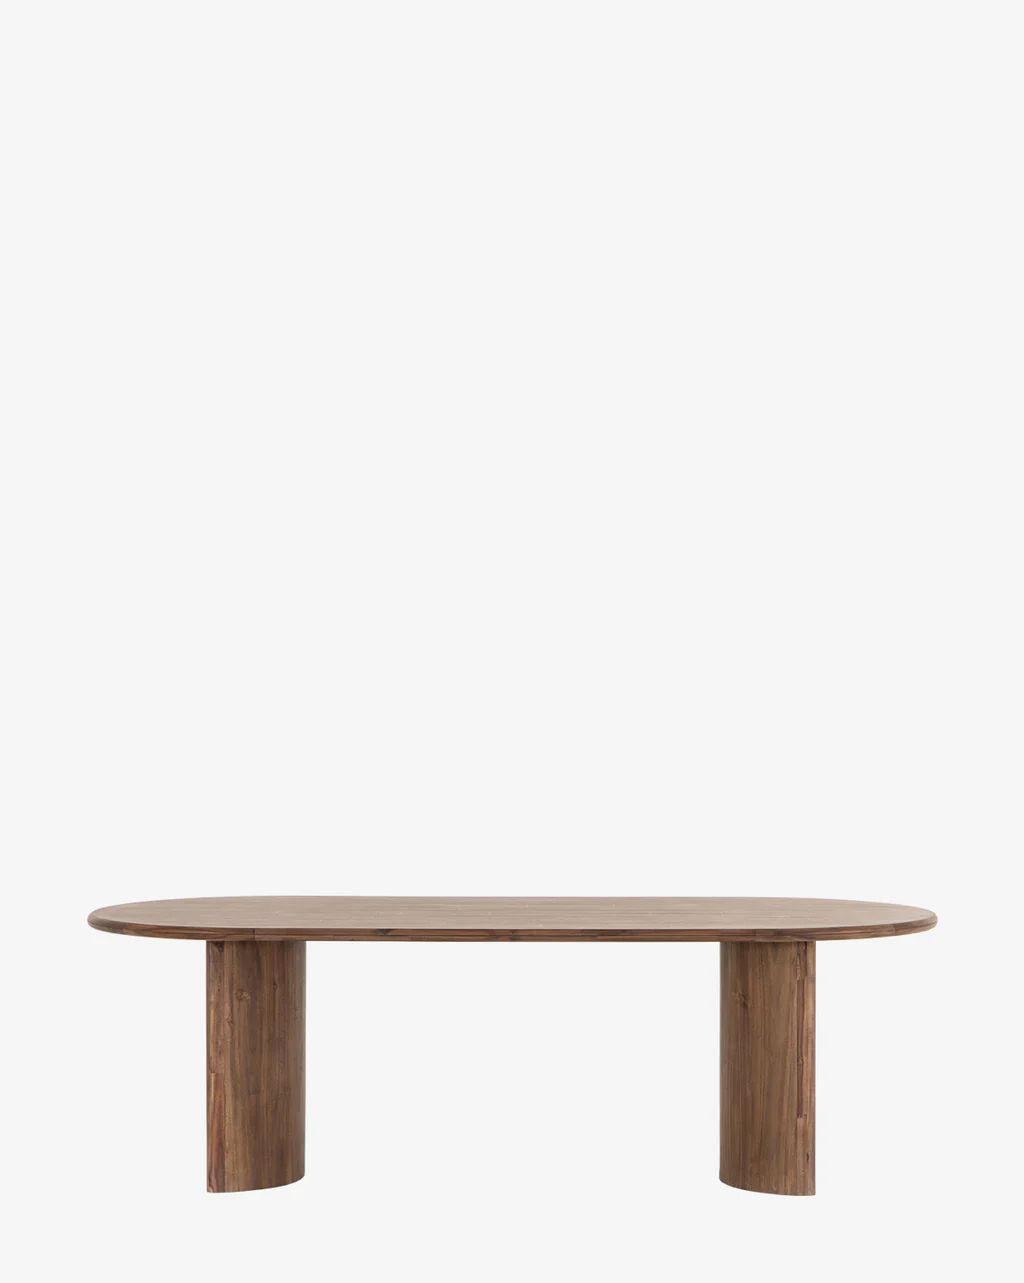 Belvedere Dining Table | McGee & Co.